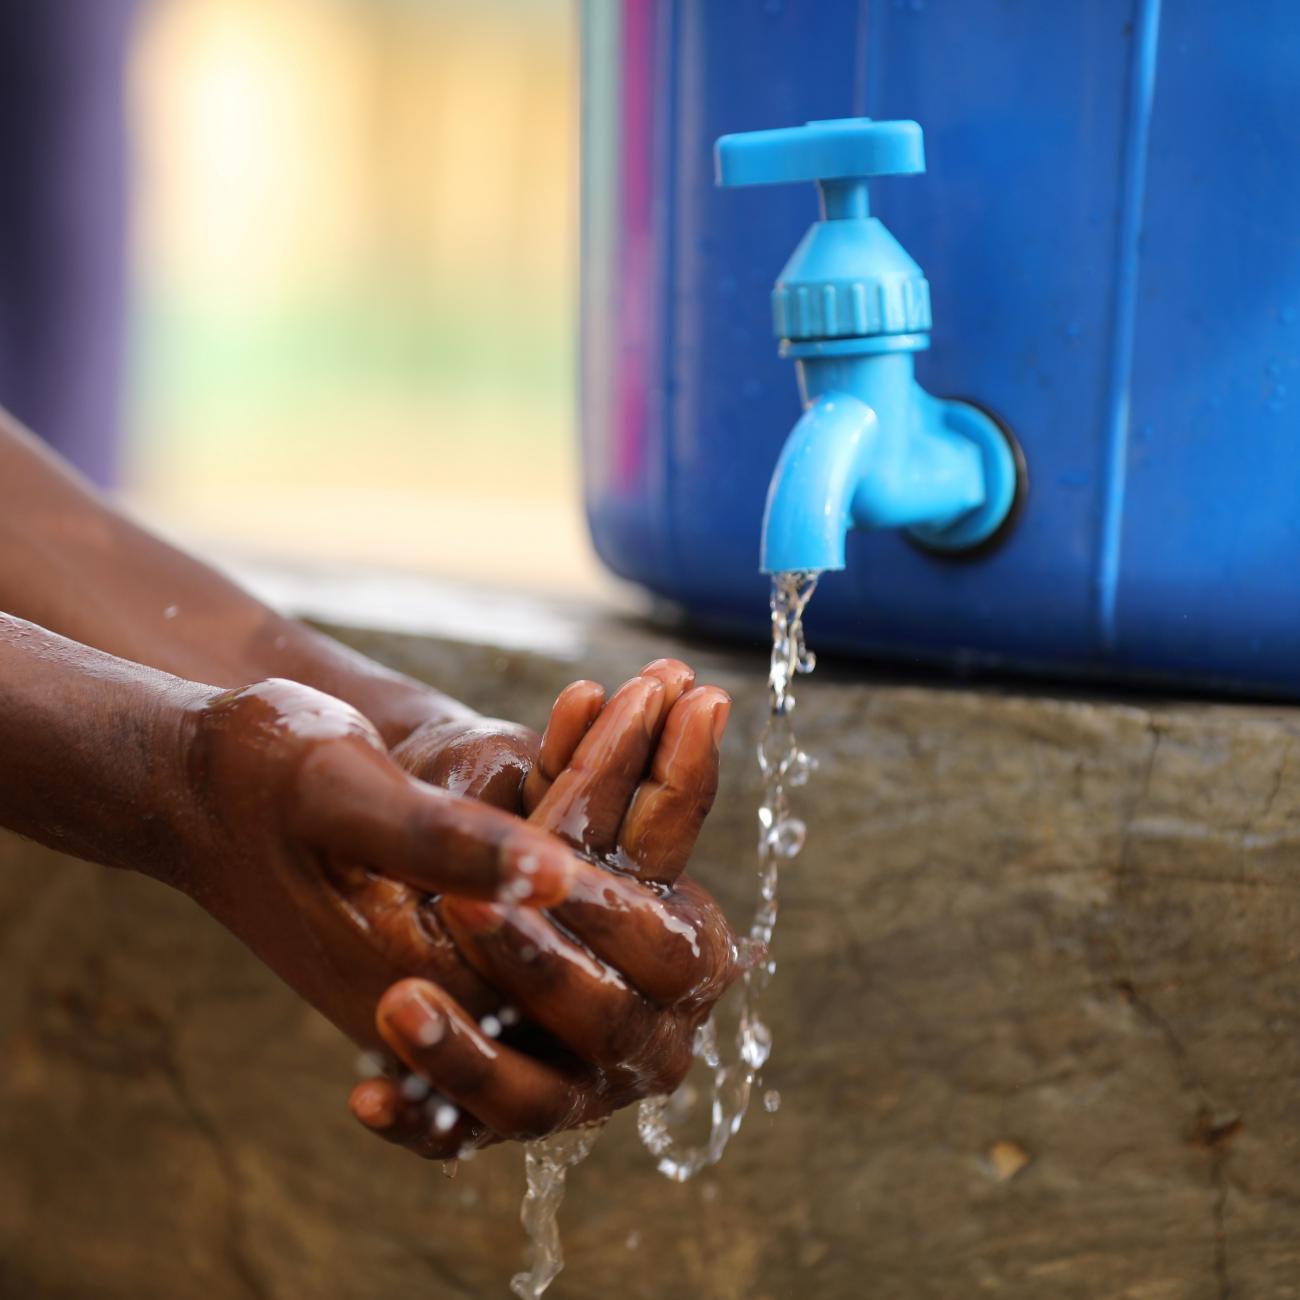 A student washes her hands at a school in Abuja, Nigeria, on March 20, 2020.